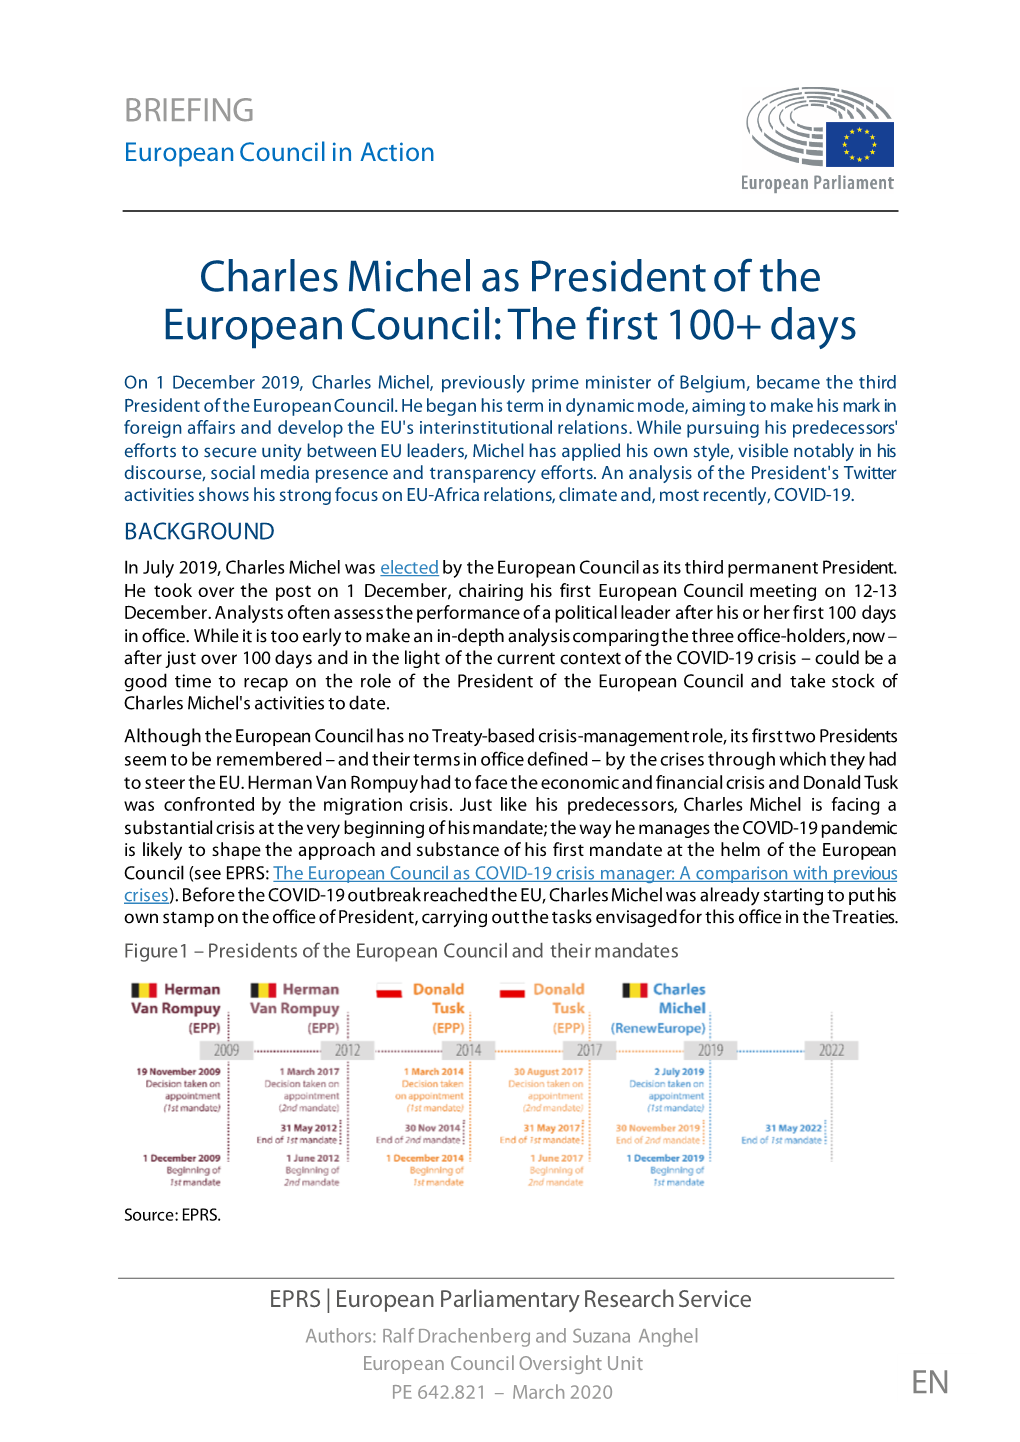 Charles Michel As President of the European Council: the First 100+ Days